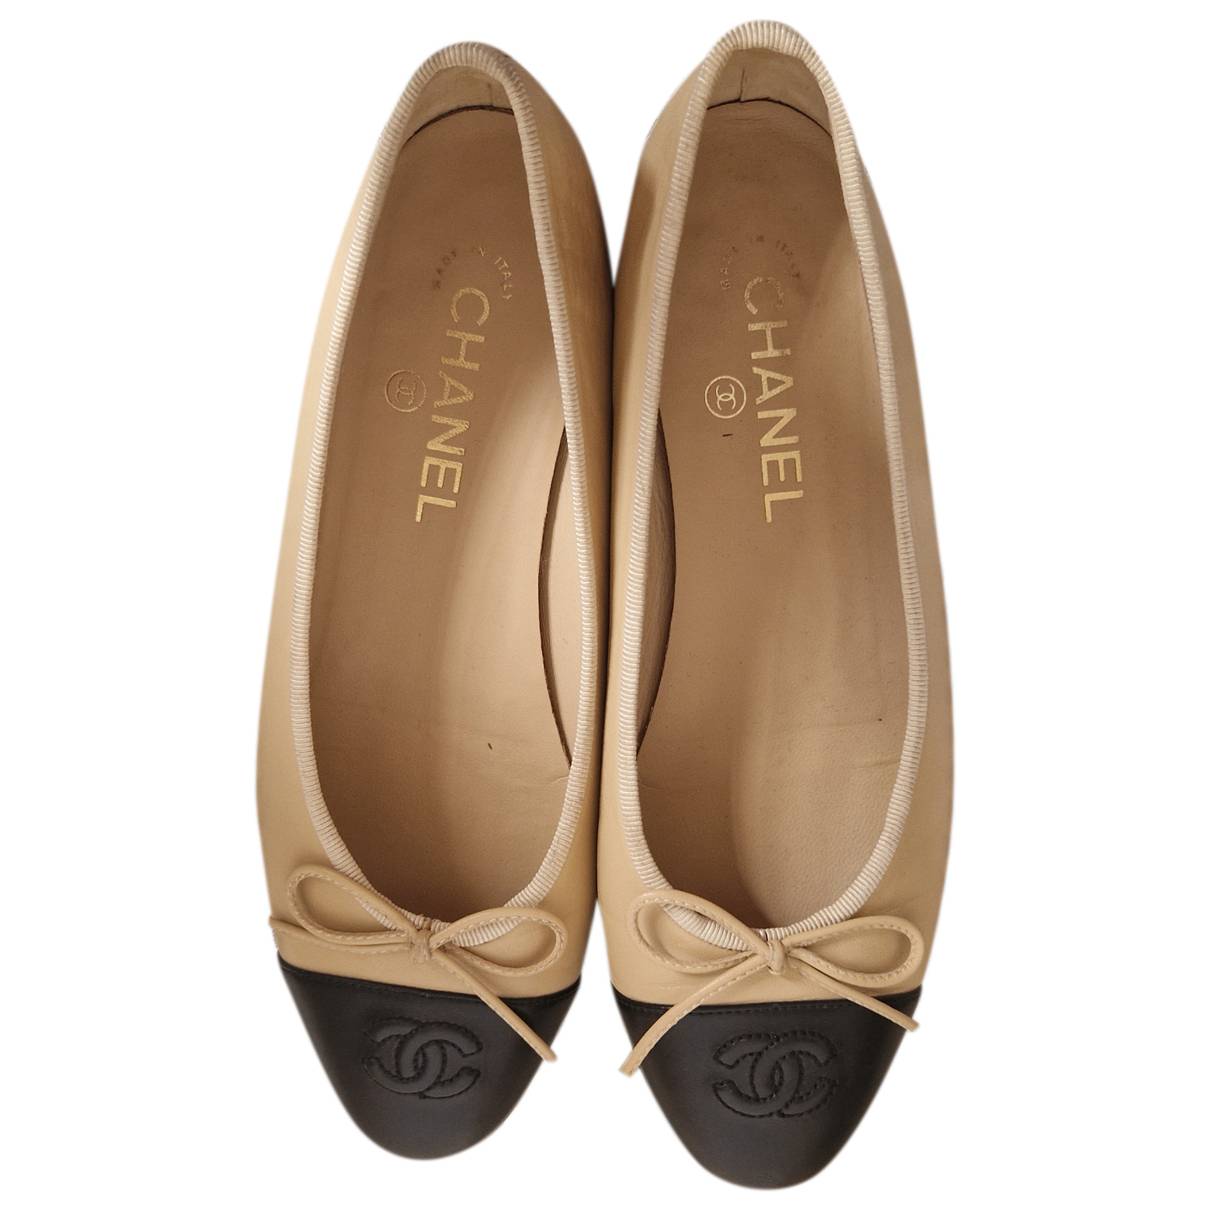 Outfit Ideas with Chanel Ballerina Flats Look for Less